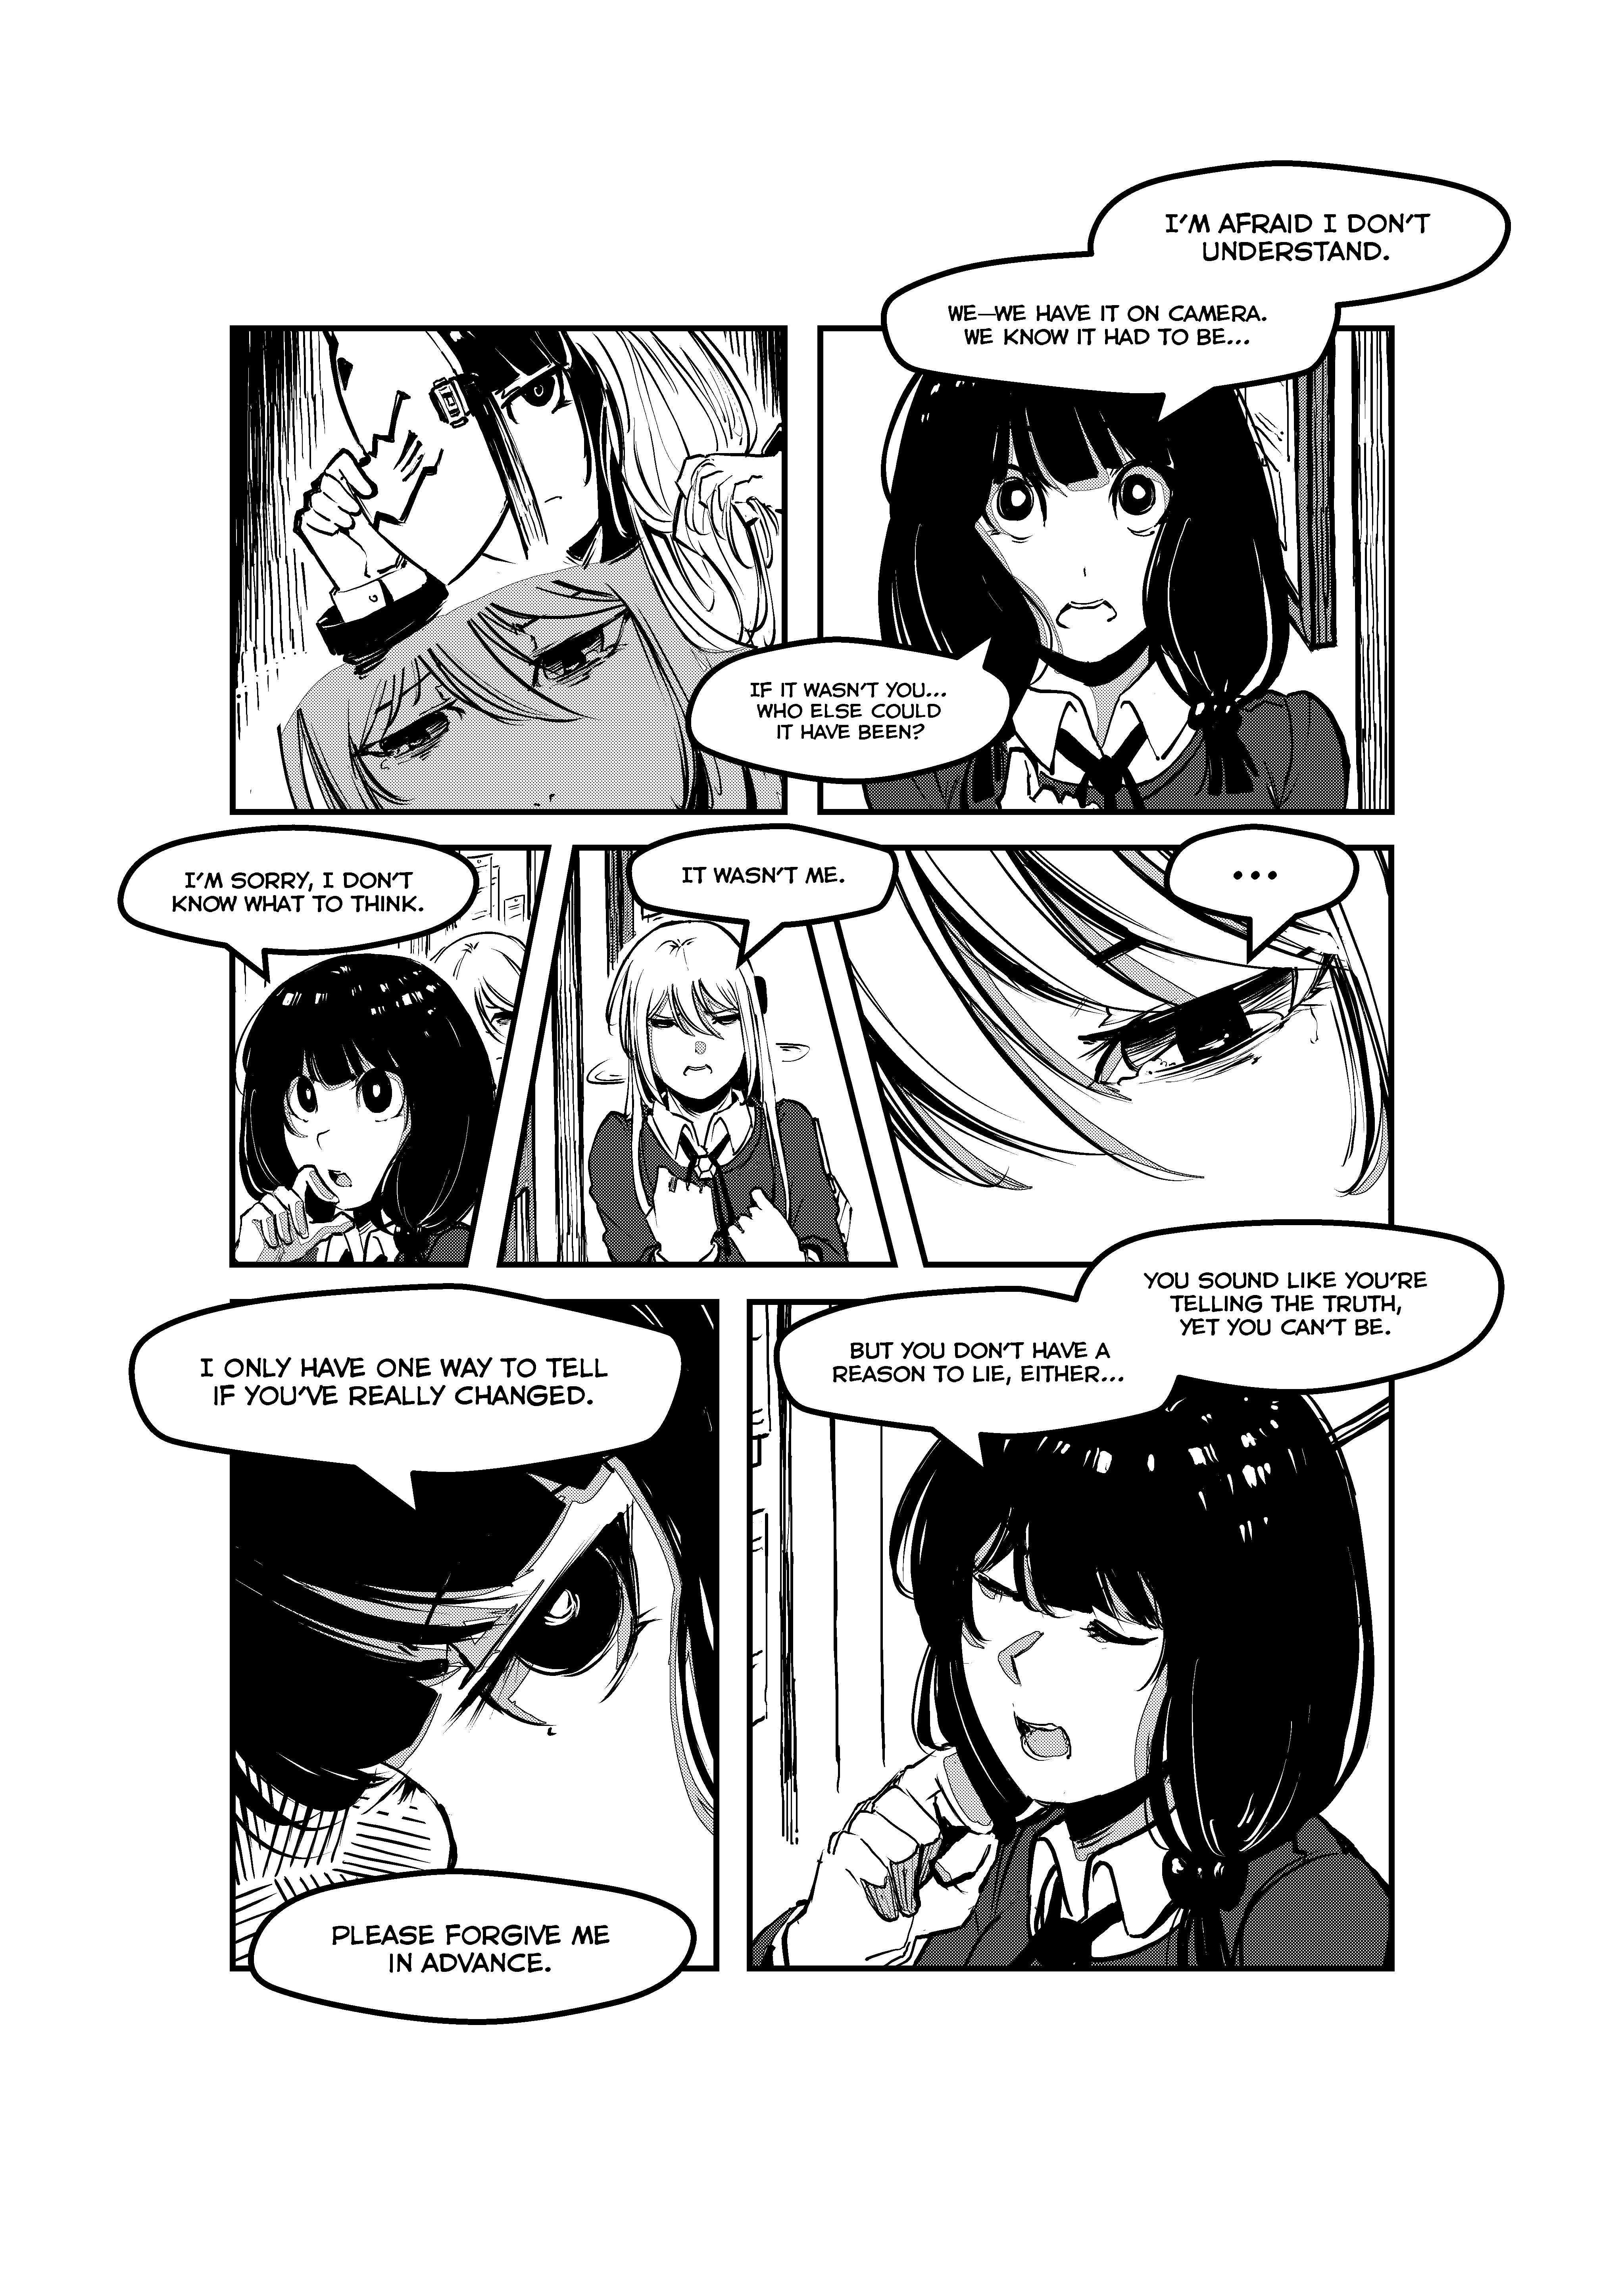 Opposites In Disguise - 21 page 14-8fb895ec